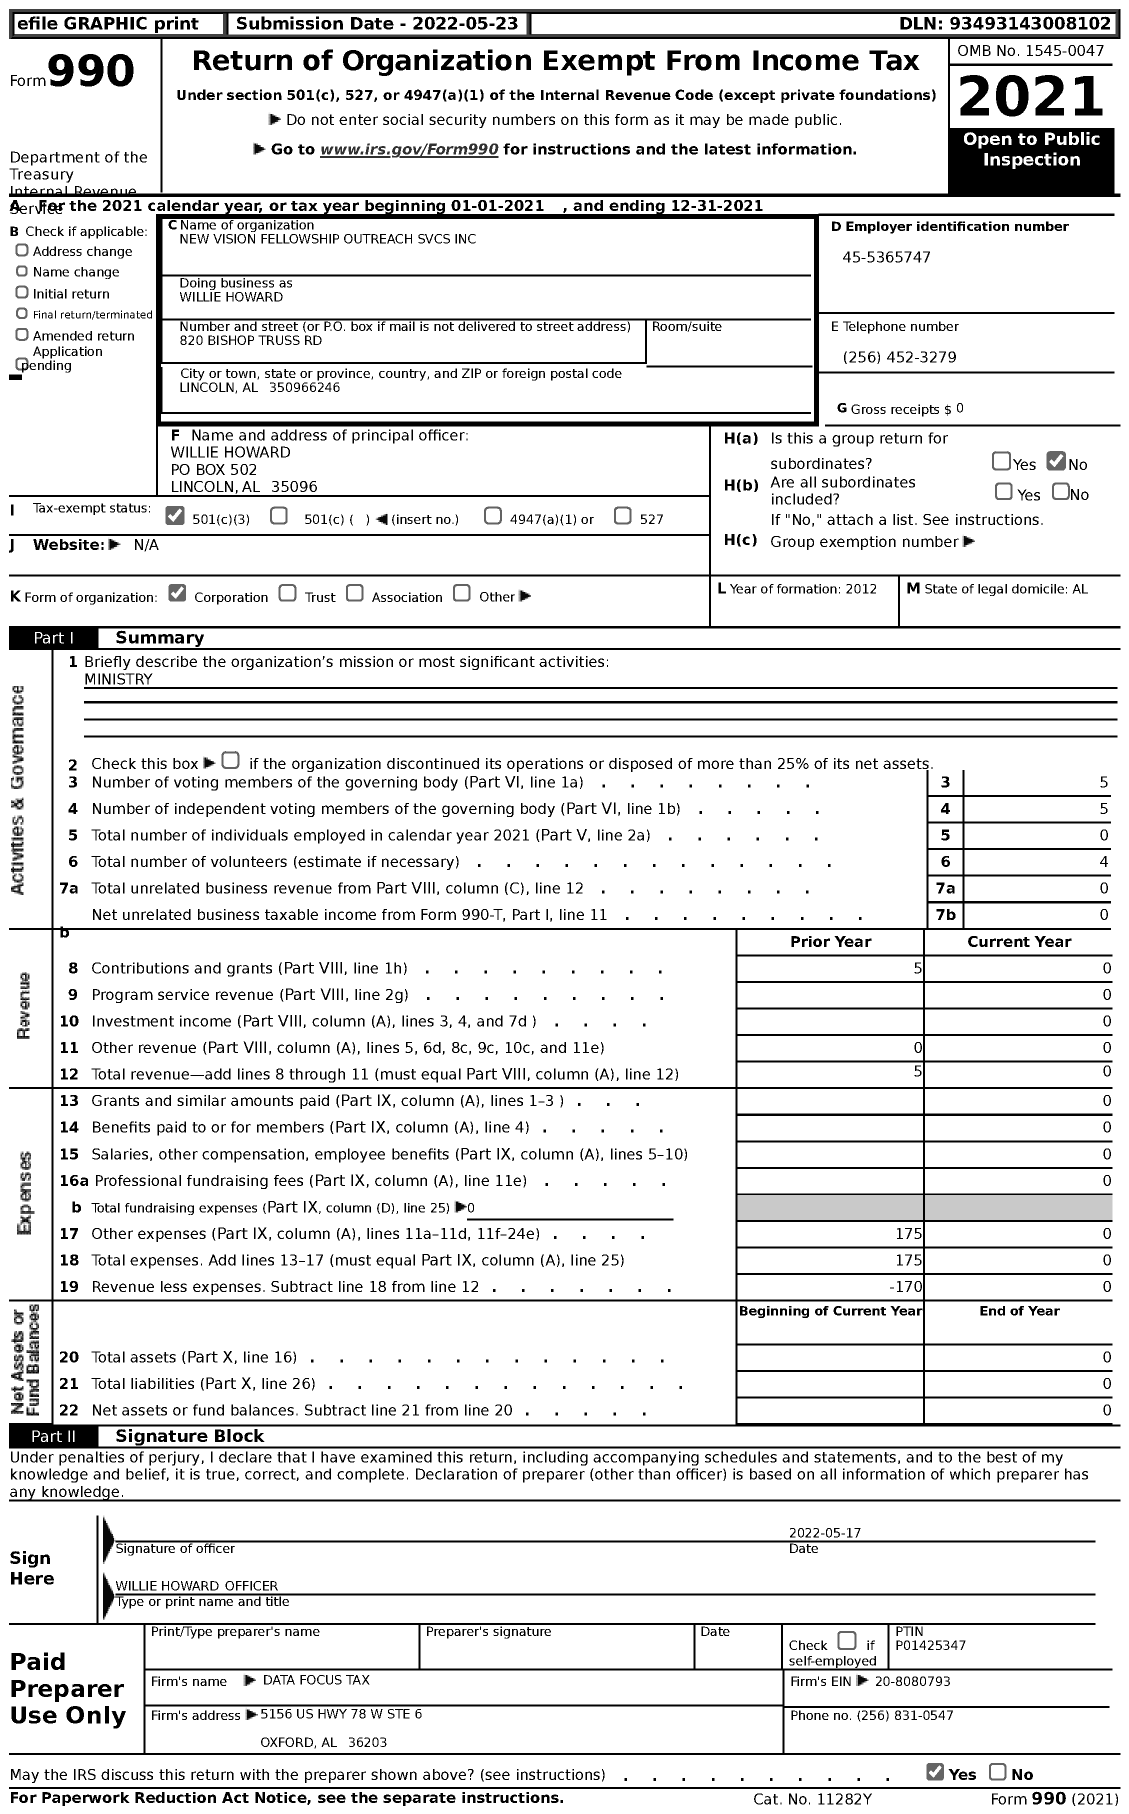 Image of first page of 2021 Form 990 for New Vision Fellowship Outreach SVCS